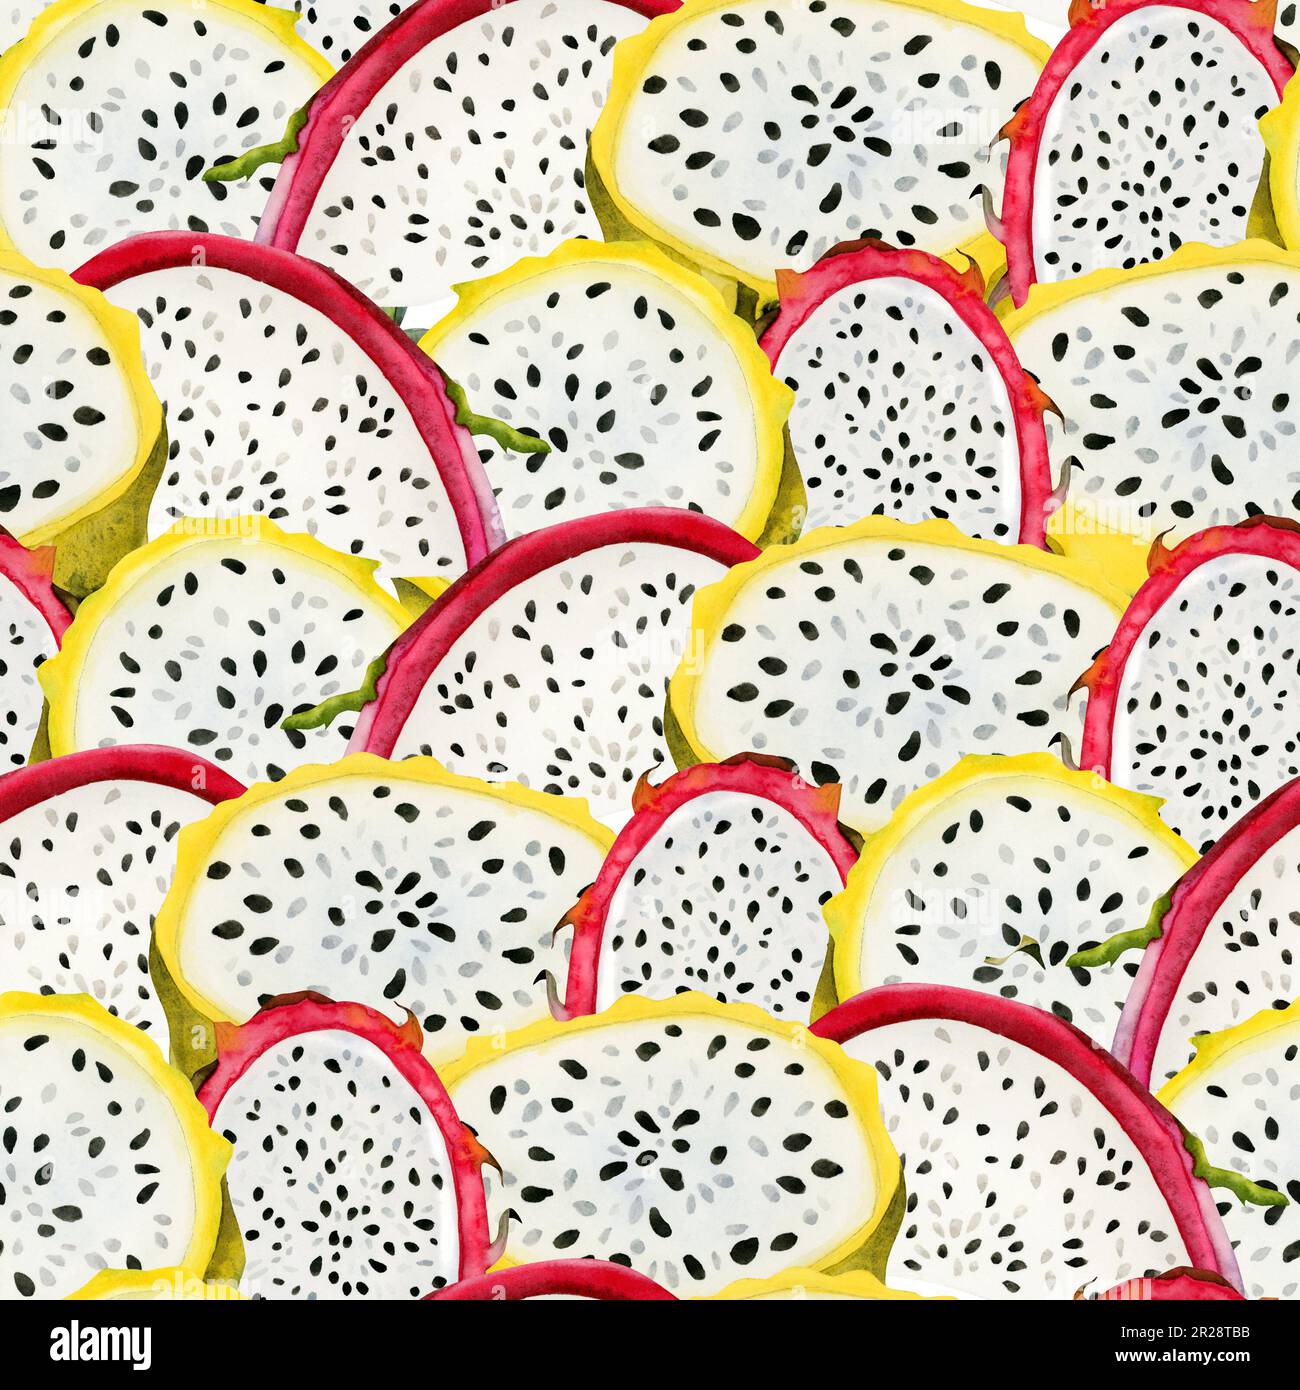 Dragon fruit slices seamless pattern with watercolor pink red and yellow pitaya cactus. Bright tropical print background Stock Photo